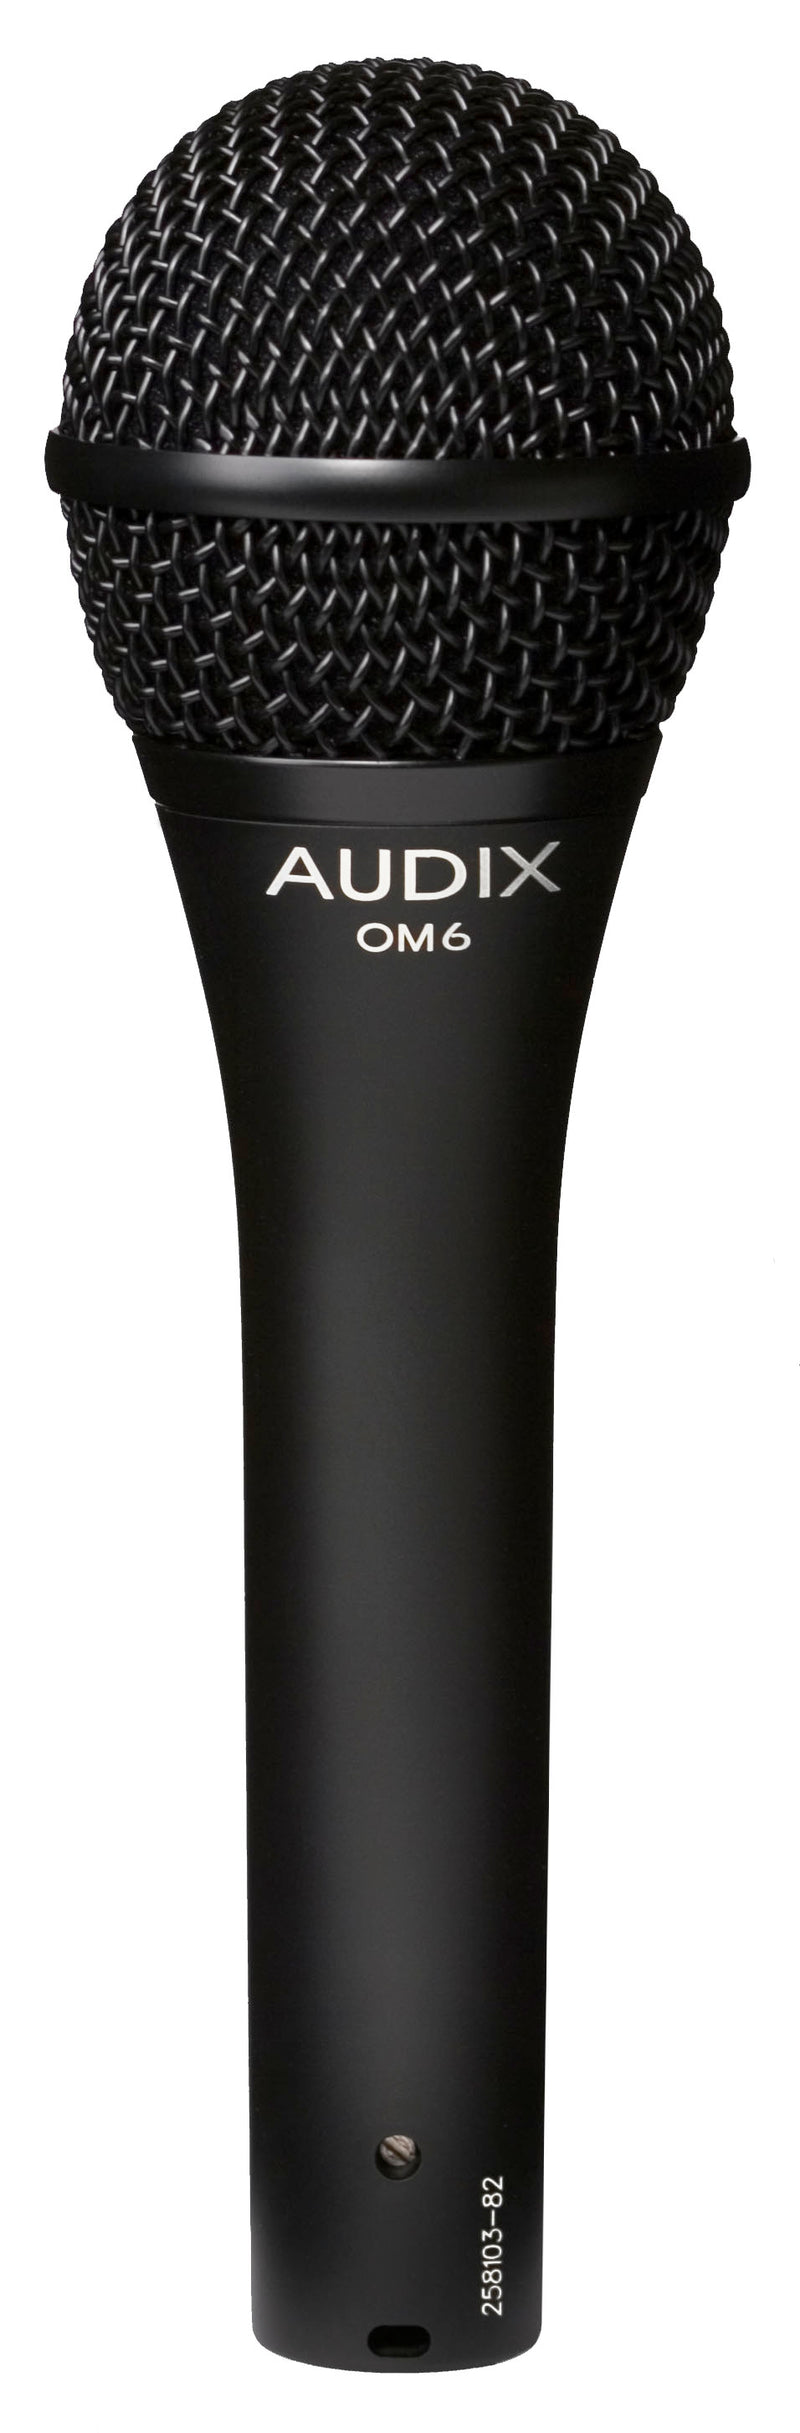 🇺🇸 Audix OM6 Dynamic Concert Level, Professional Vocal Microphone Highly Accurate Frequency Response